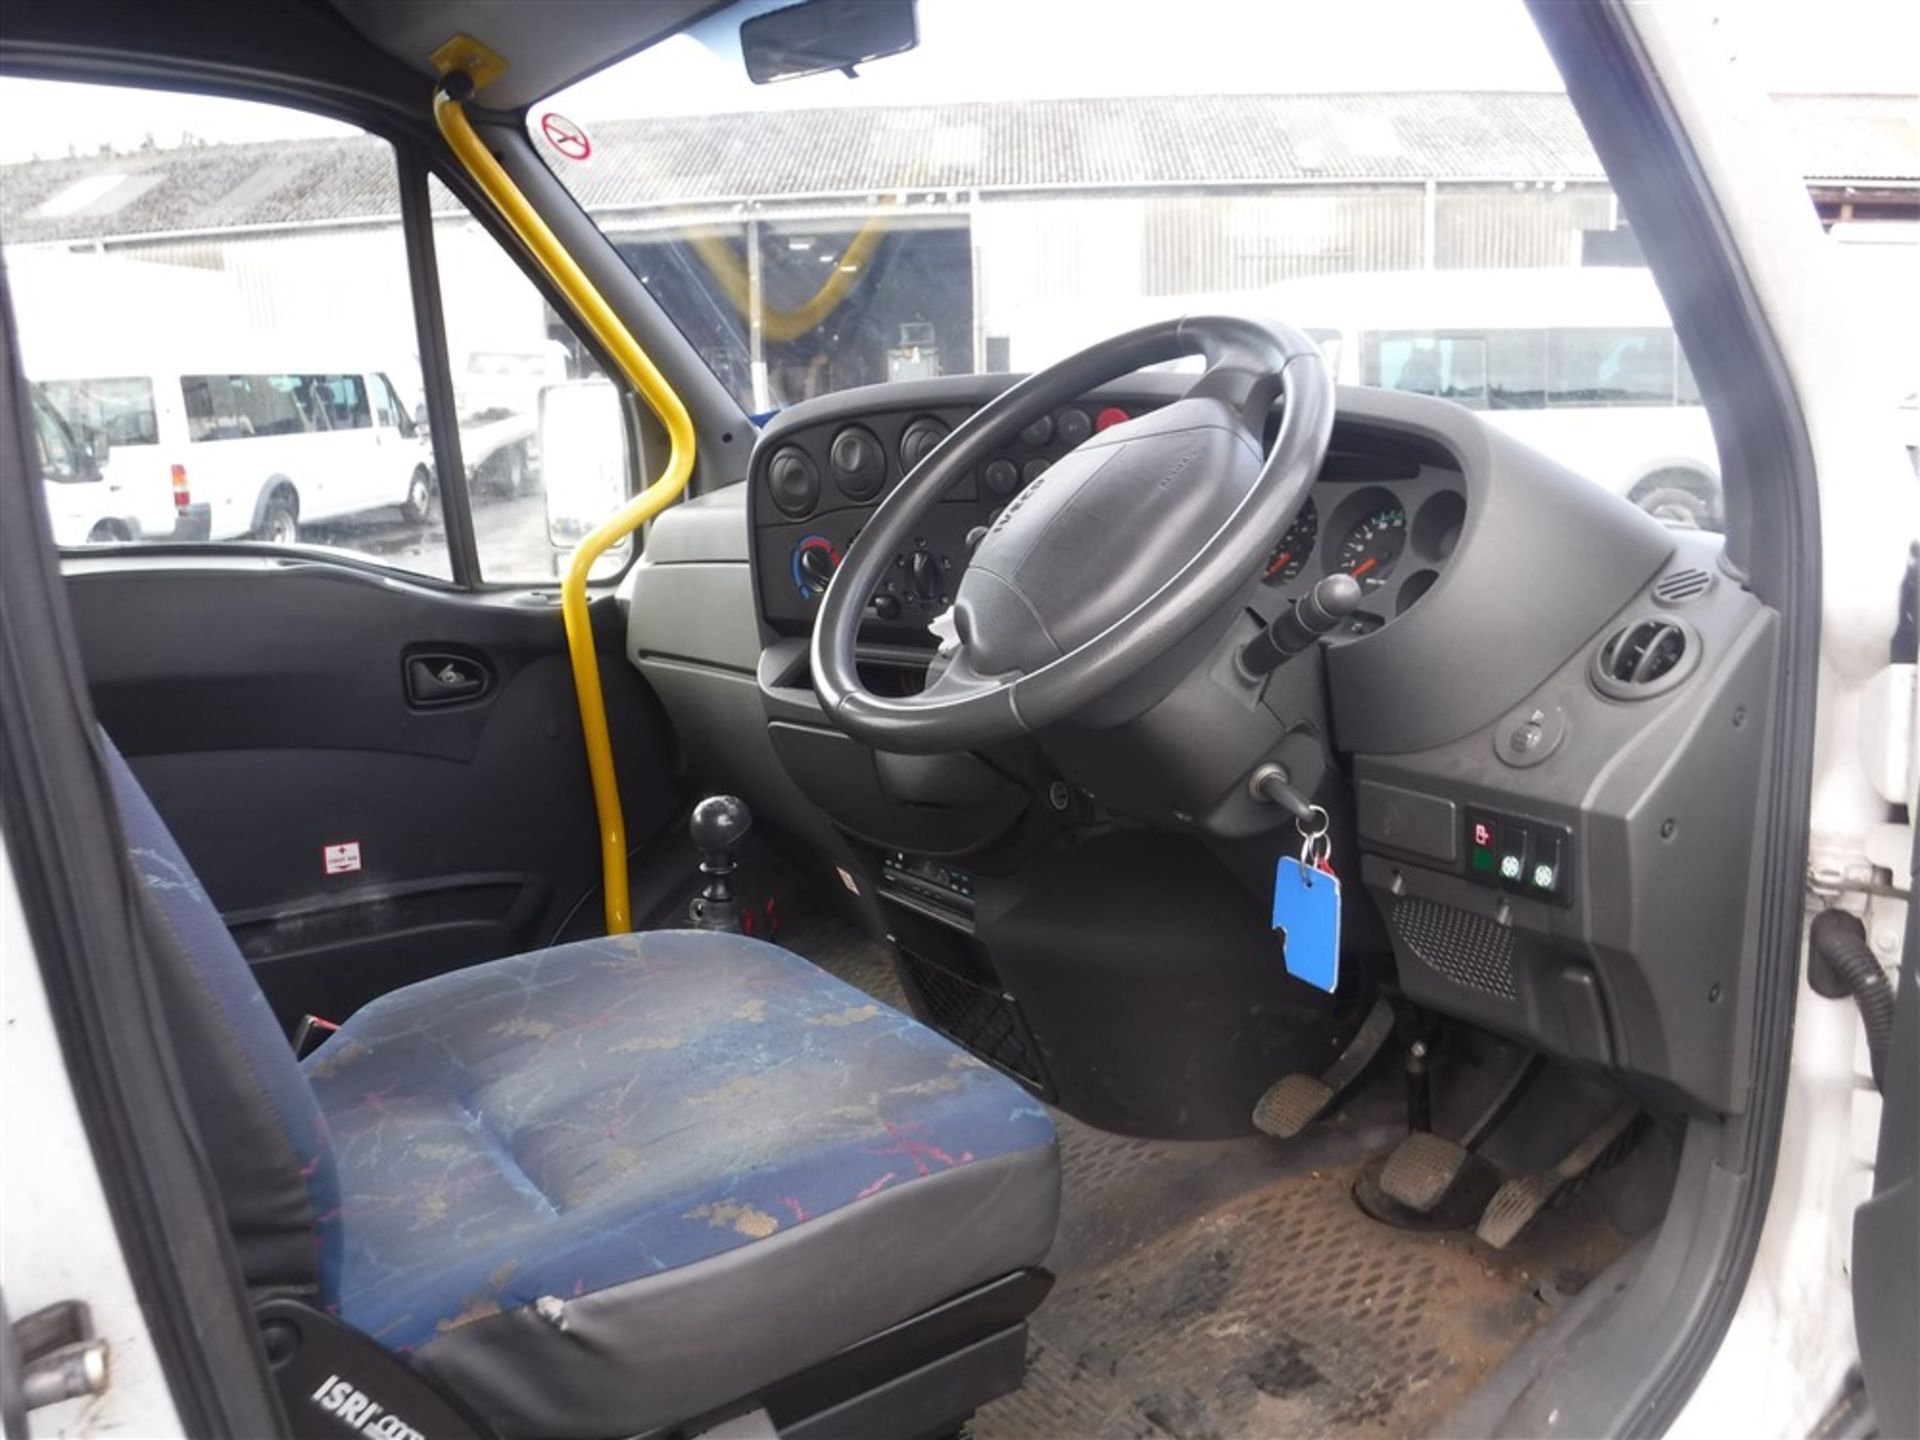 03 reg IVECO DAILY 40C13 IRIS BUS, 1ST REG 03/03, TEST 03/19, 105672KM WARRANTED, V5 HERE, 1 OWNER - Image 5 of 6